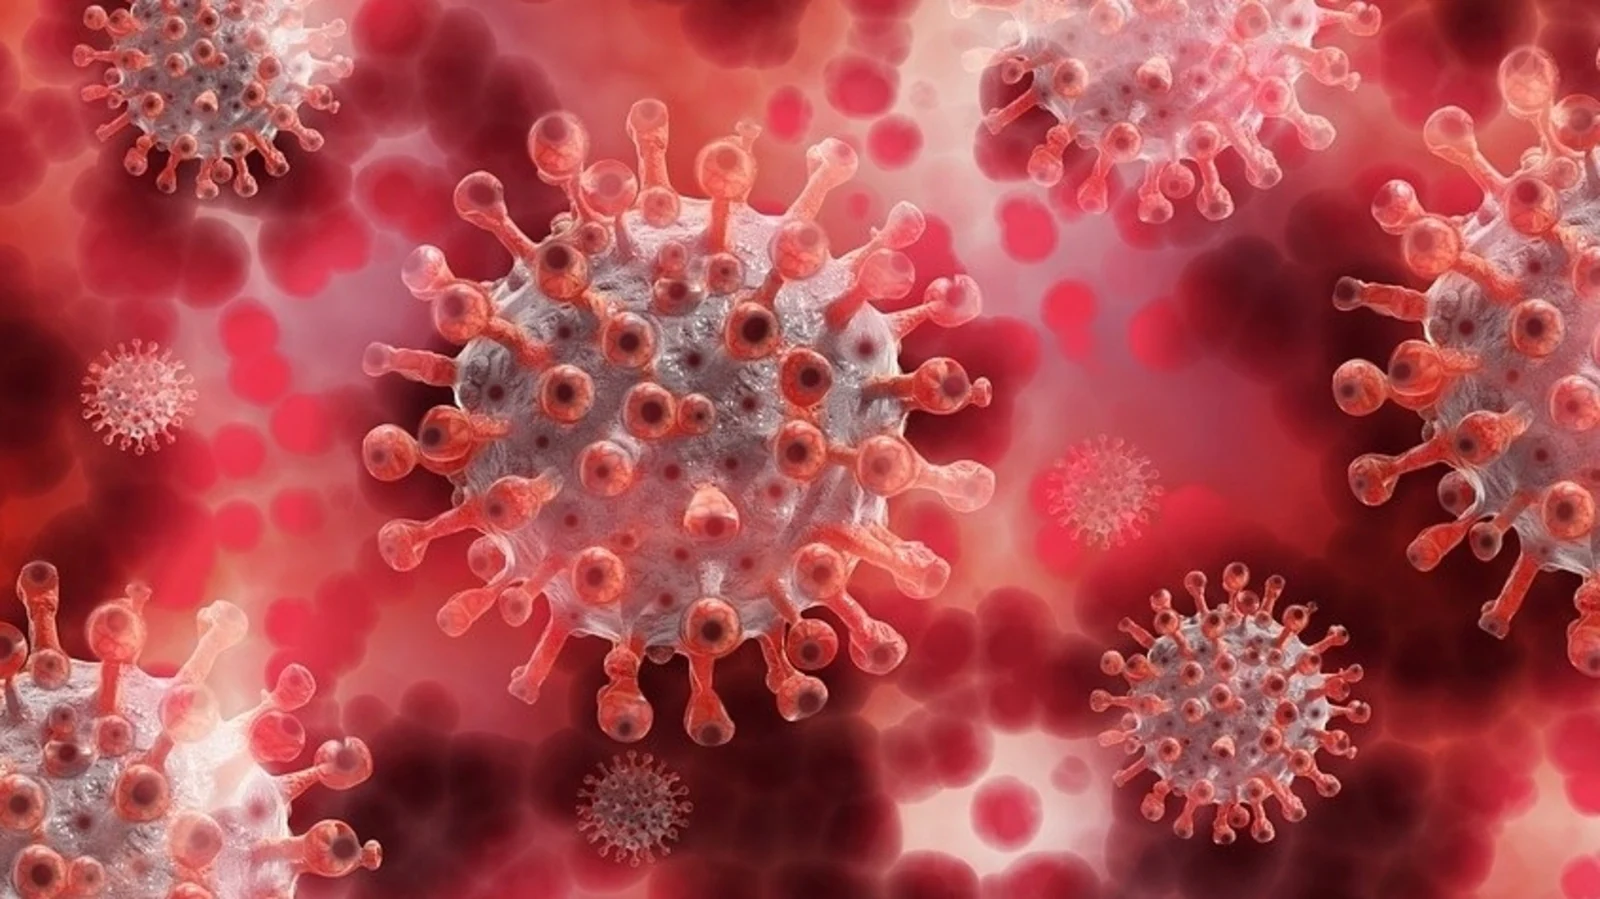 Covid-19 three times more lethal than influenza, study suggests